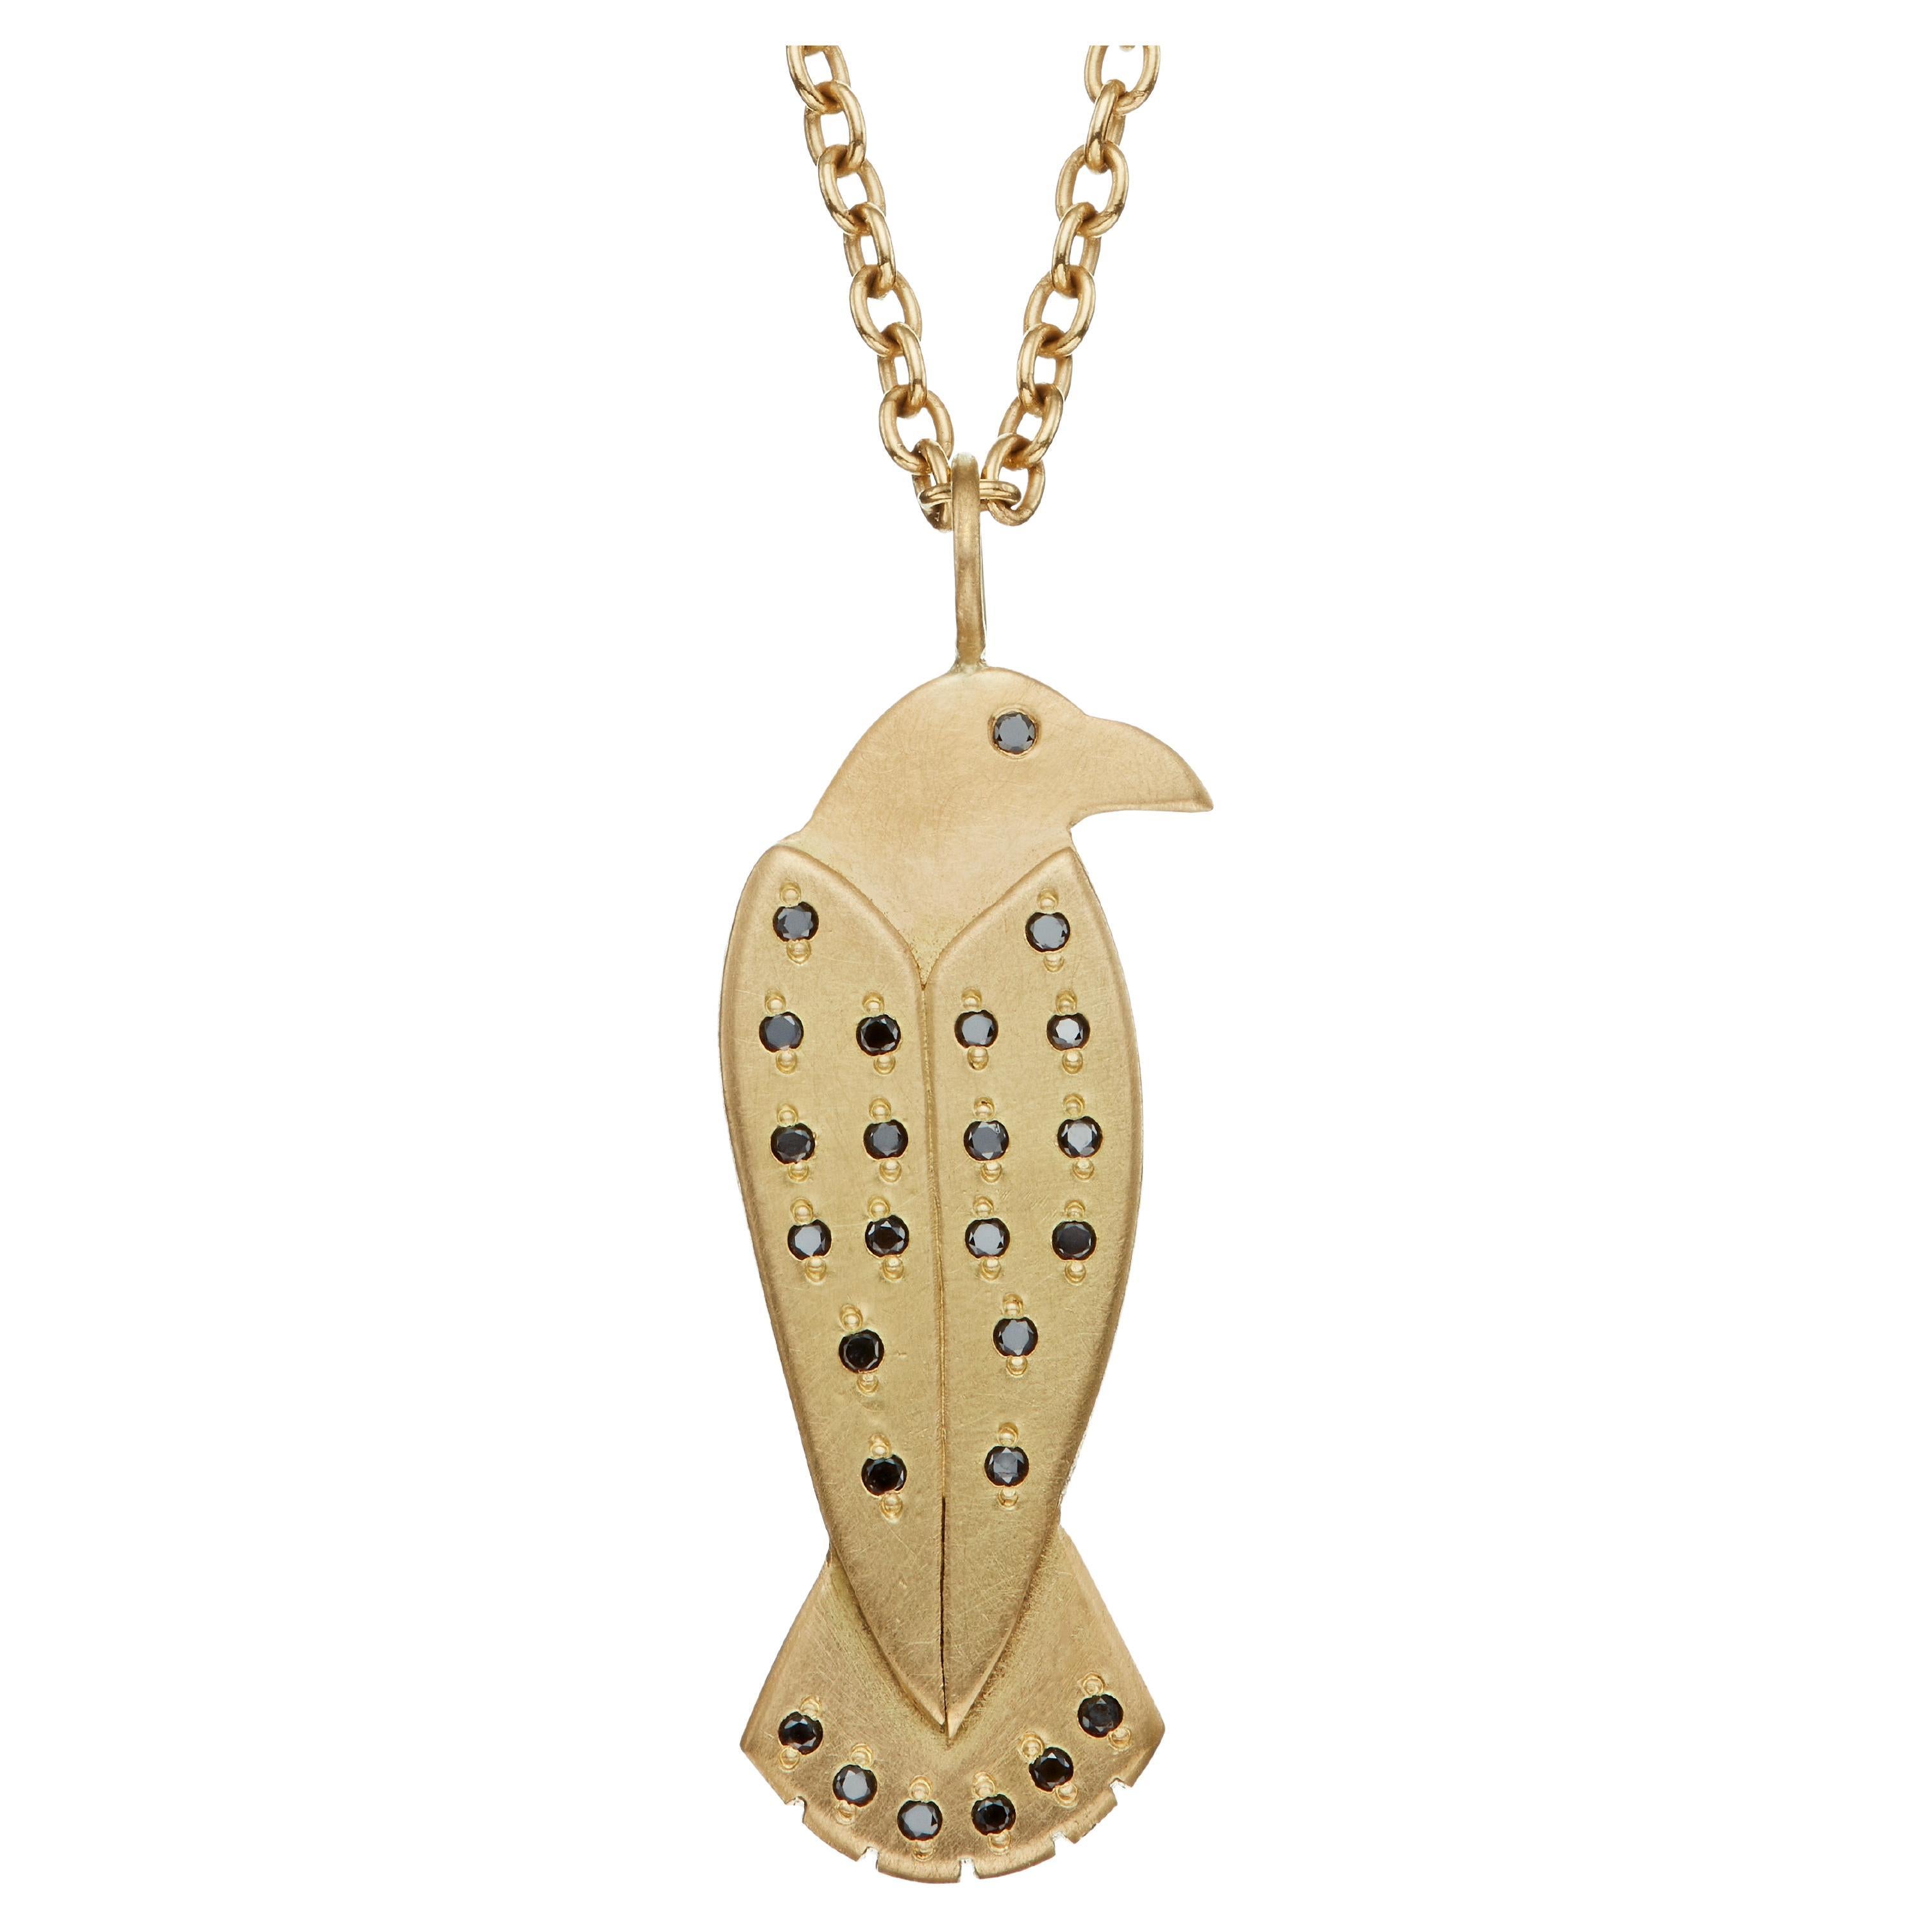 The Merla Crow Ethical Amulet Pendant 18ct Fairtrade Gold and Black Diamonds For Sale